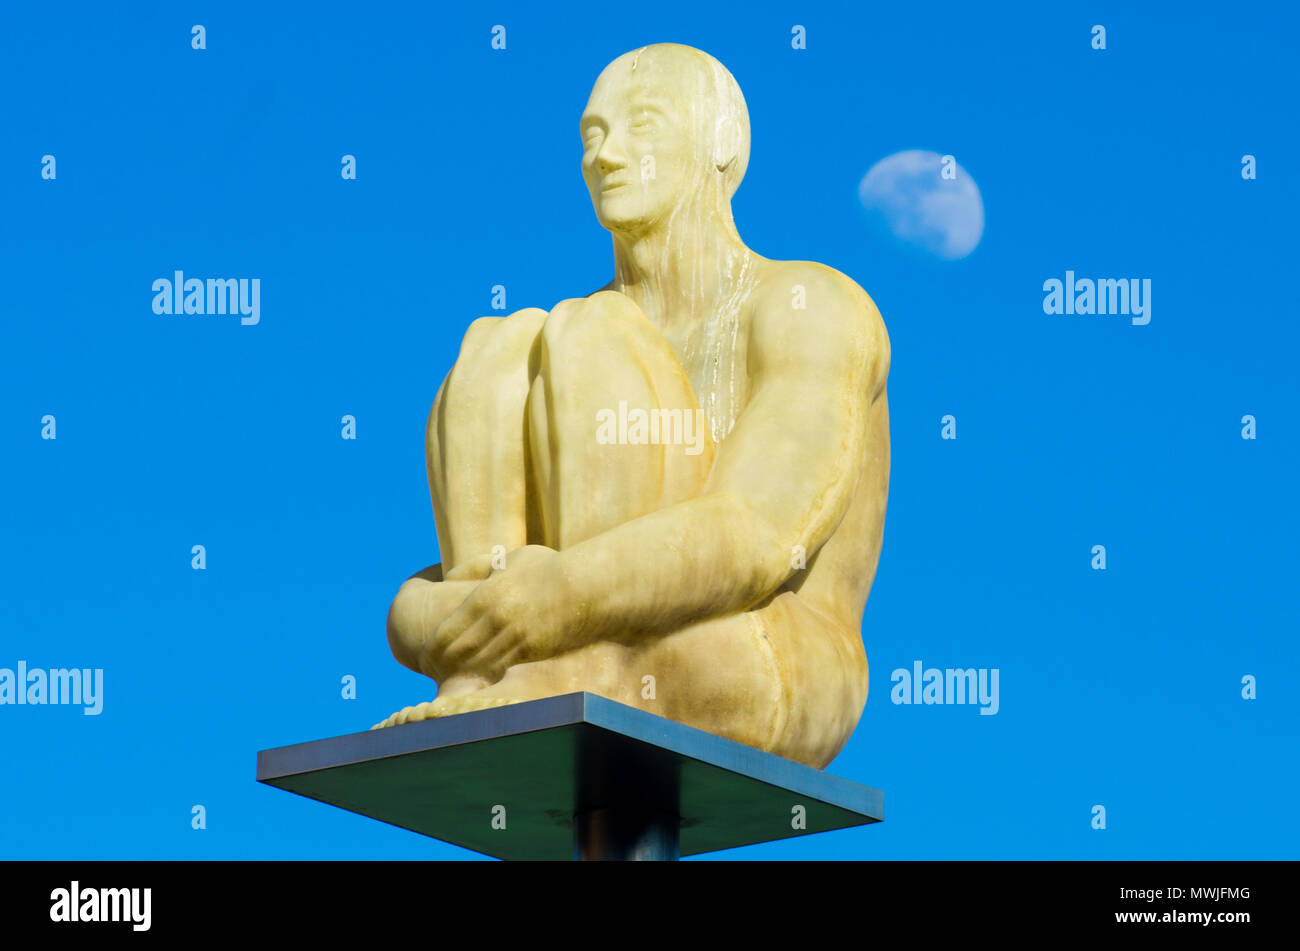 NICE,FRANCE-MAY 20:  One of the seven statues from "Conversation à Nice" by Jaume Plensa on place Masséna, in Nice, the capital of cote d'Azur, on the Stock Photo